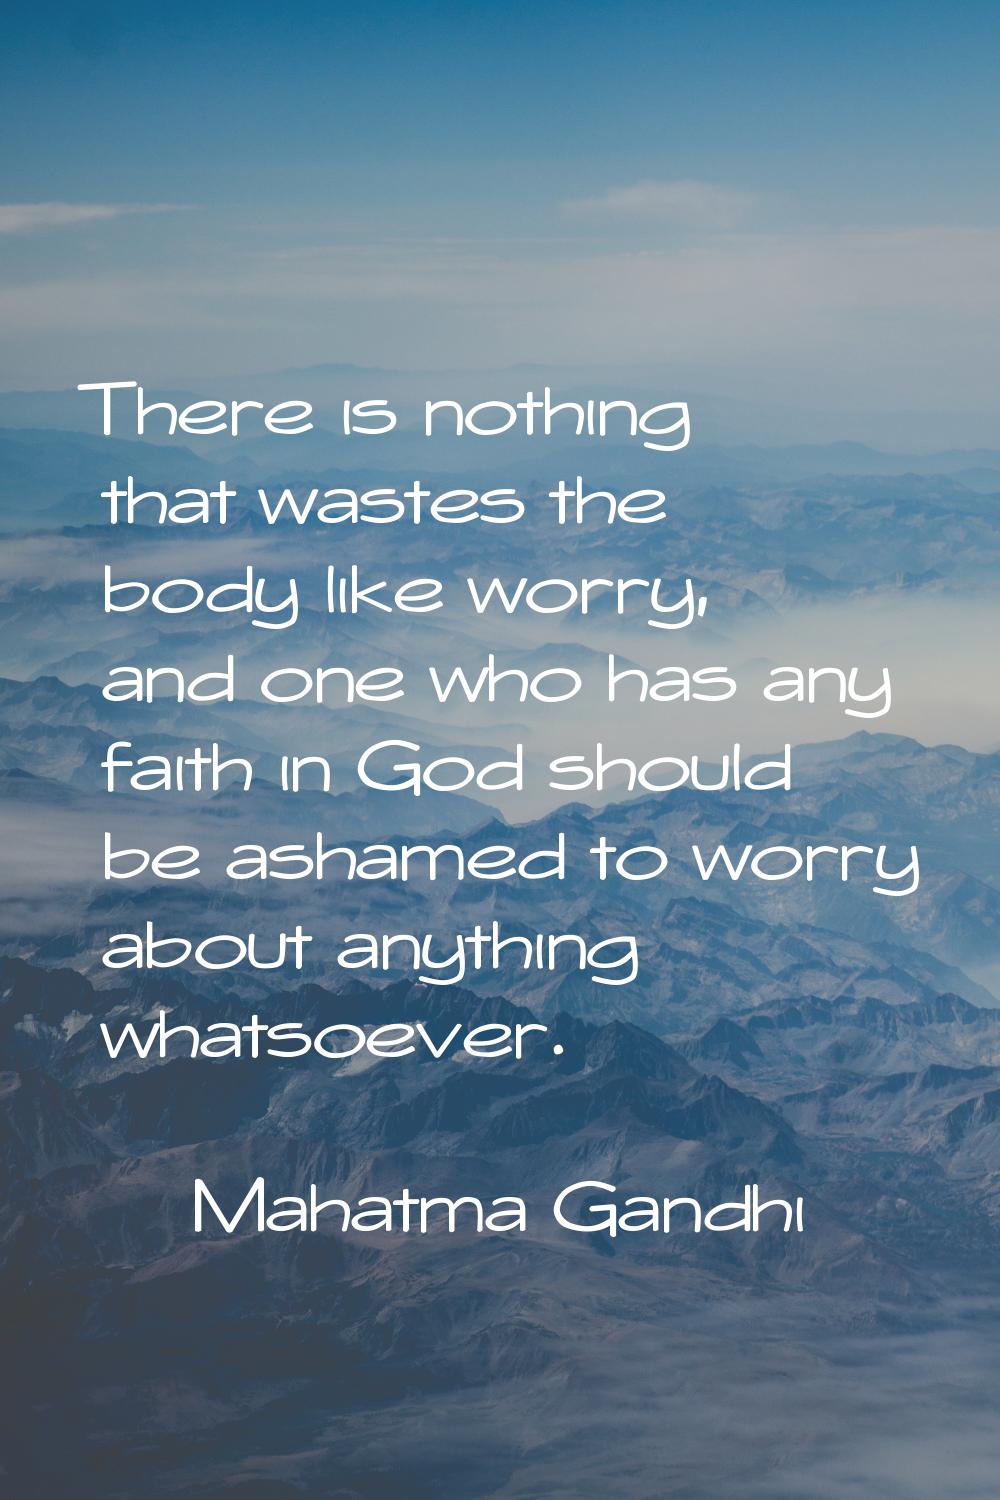 There is nothing that wastes the body like worry, and one who has any faith in God should be ashame